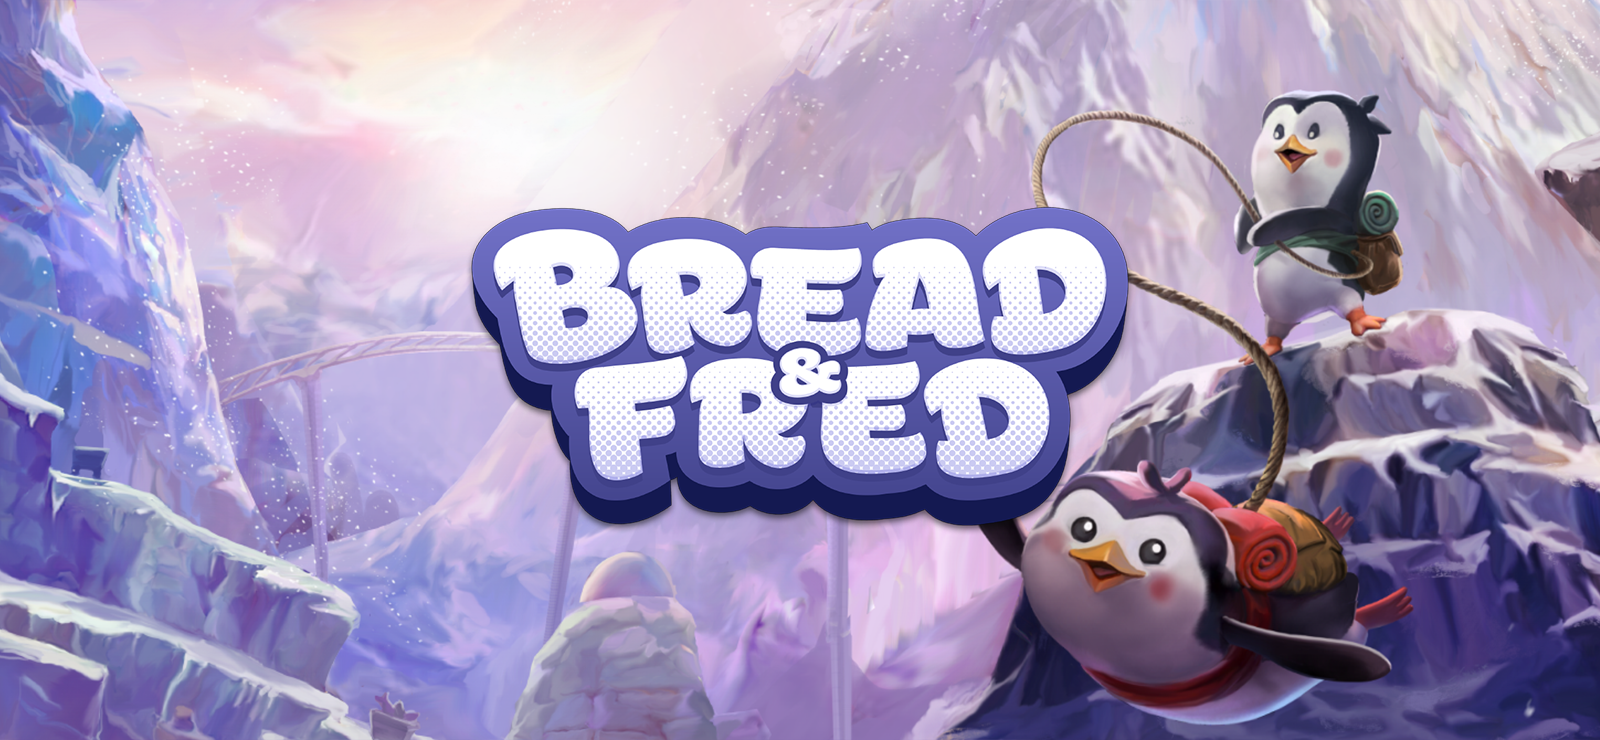 Bread & Fred is a co-op platformer starring tandem penguin climbers